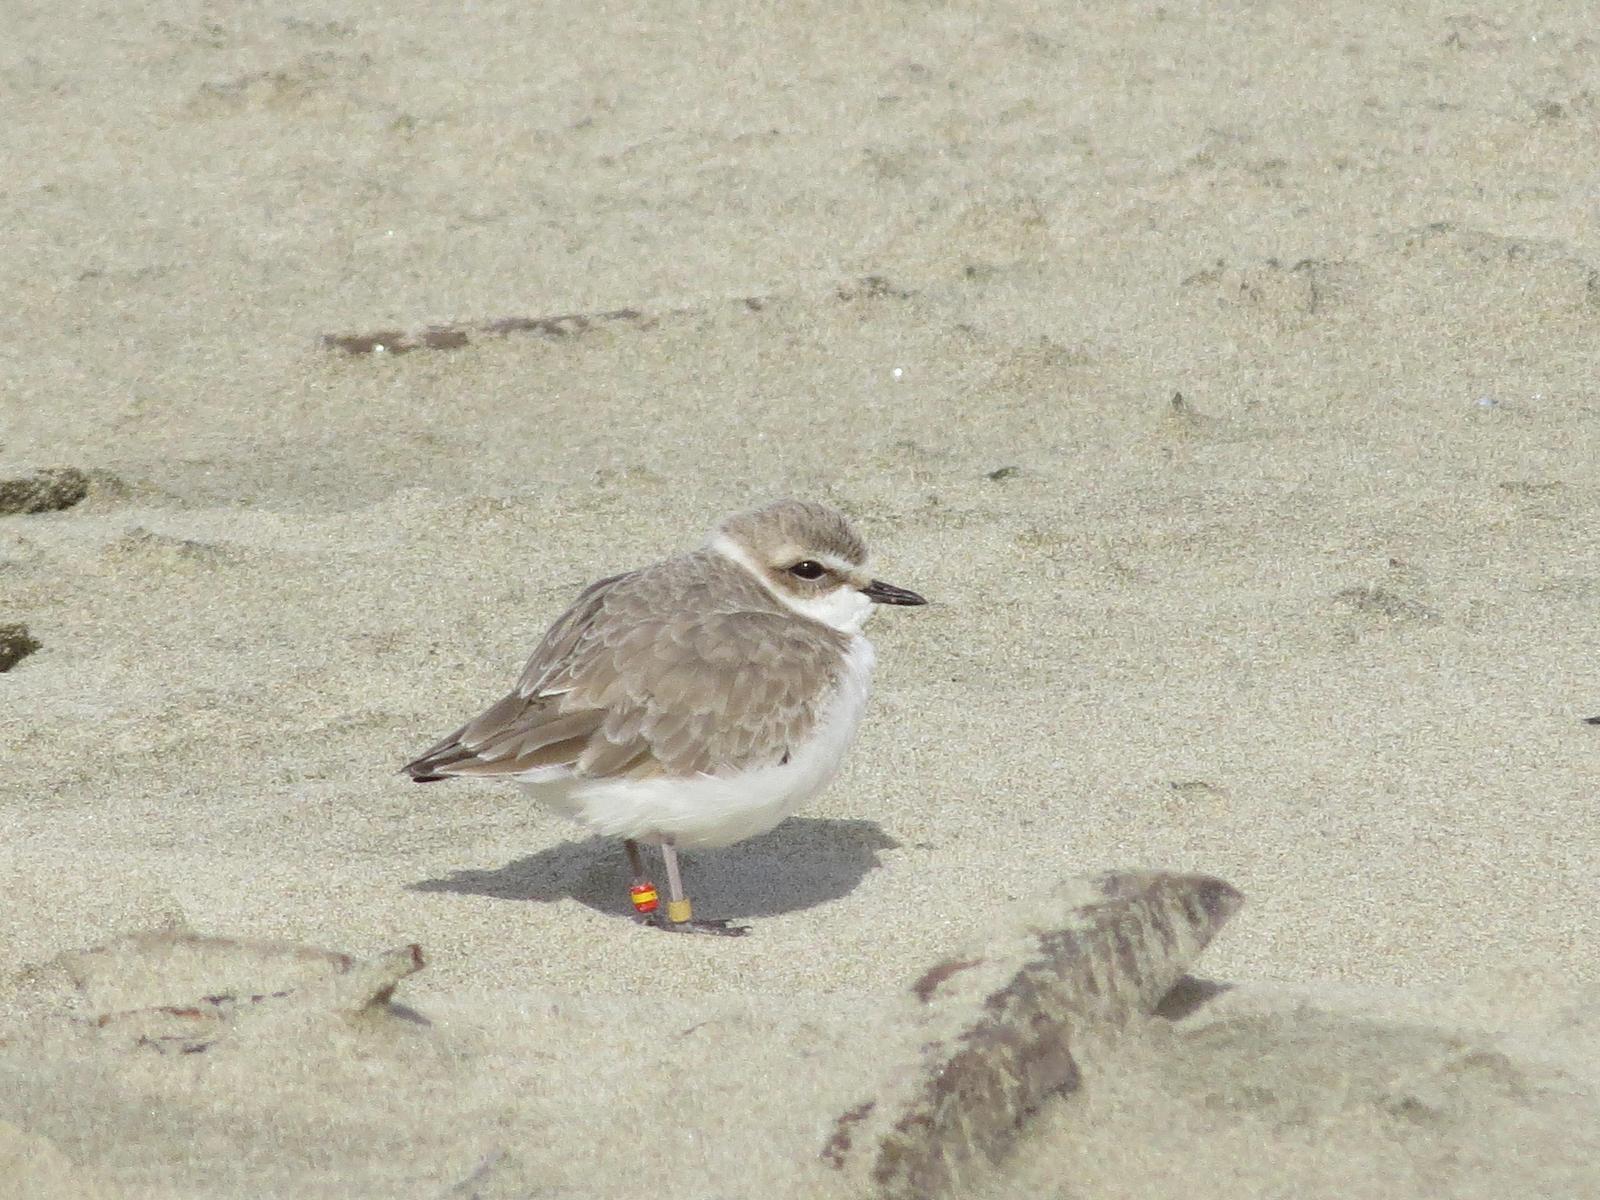 Snowy Plover Photo by Jeff Harding